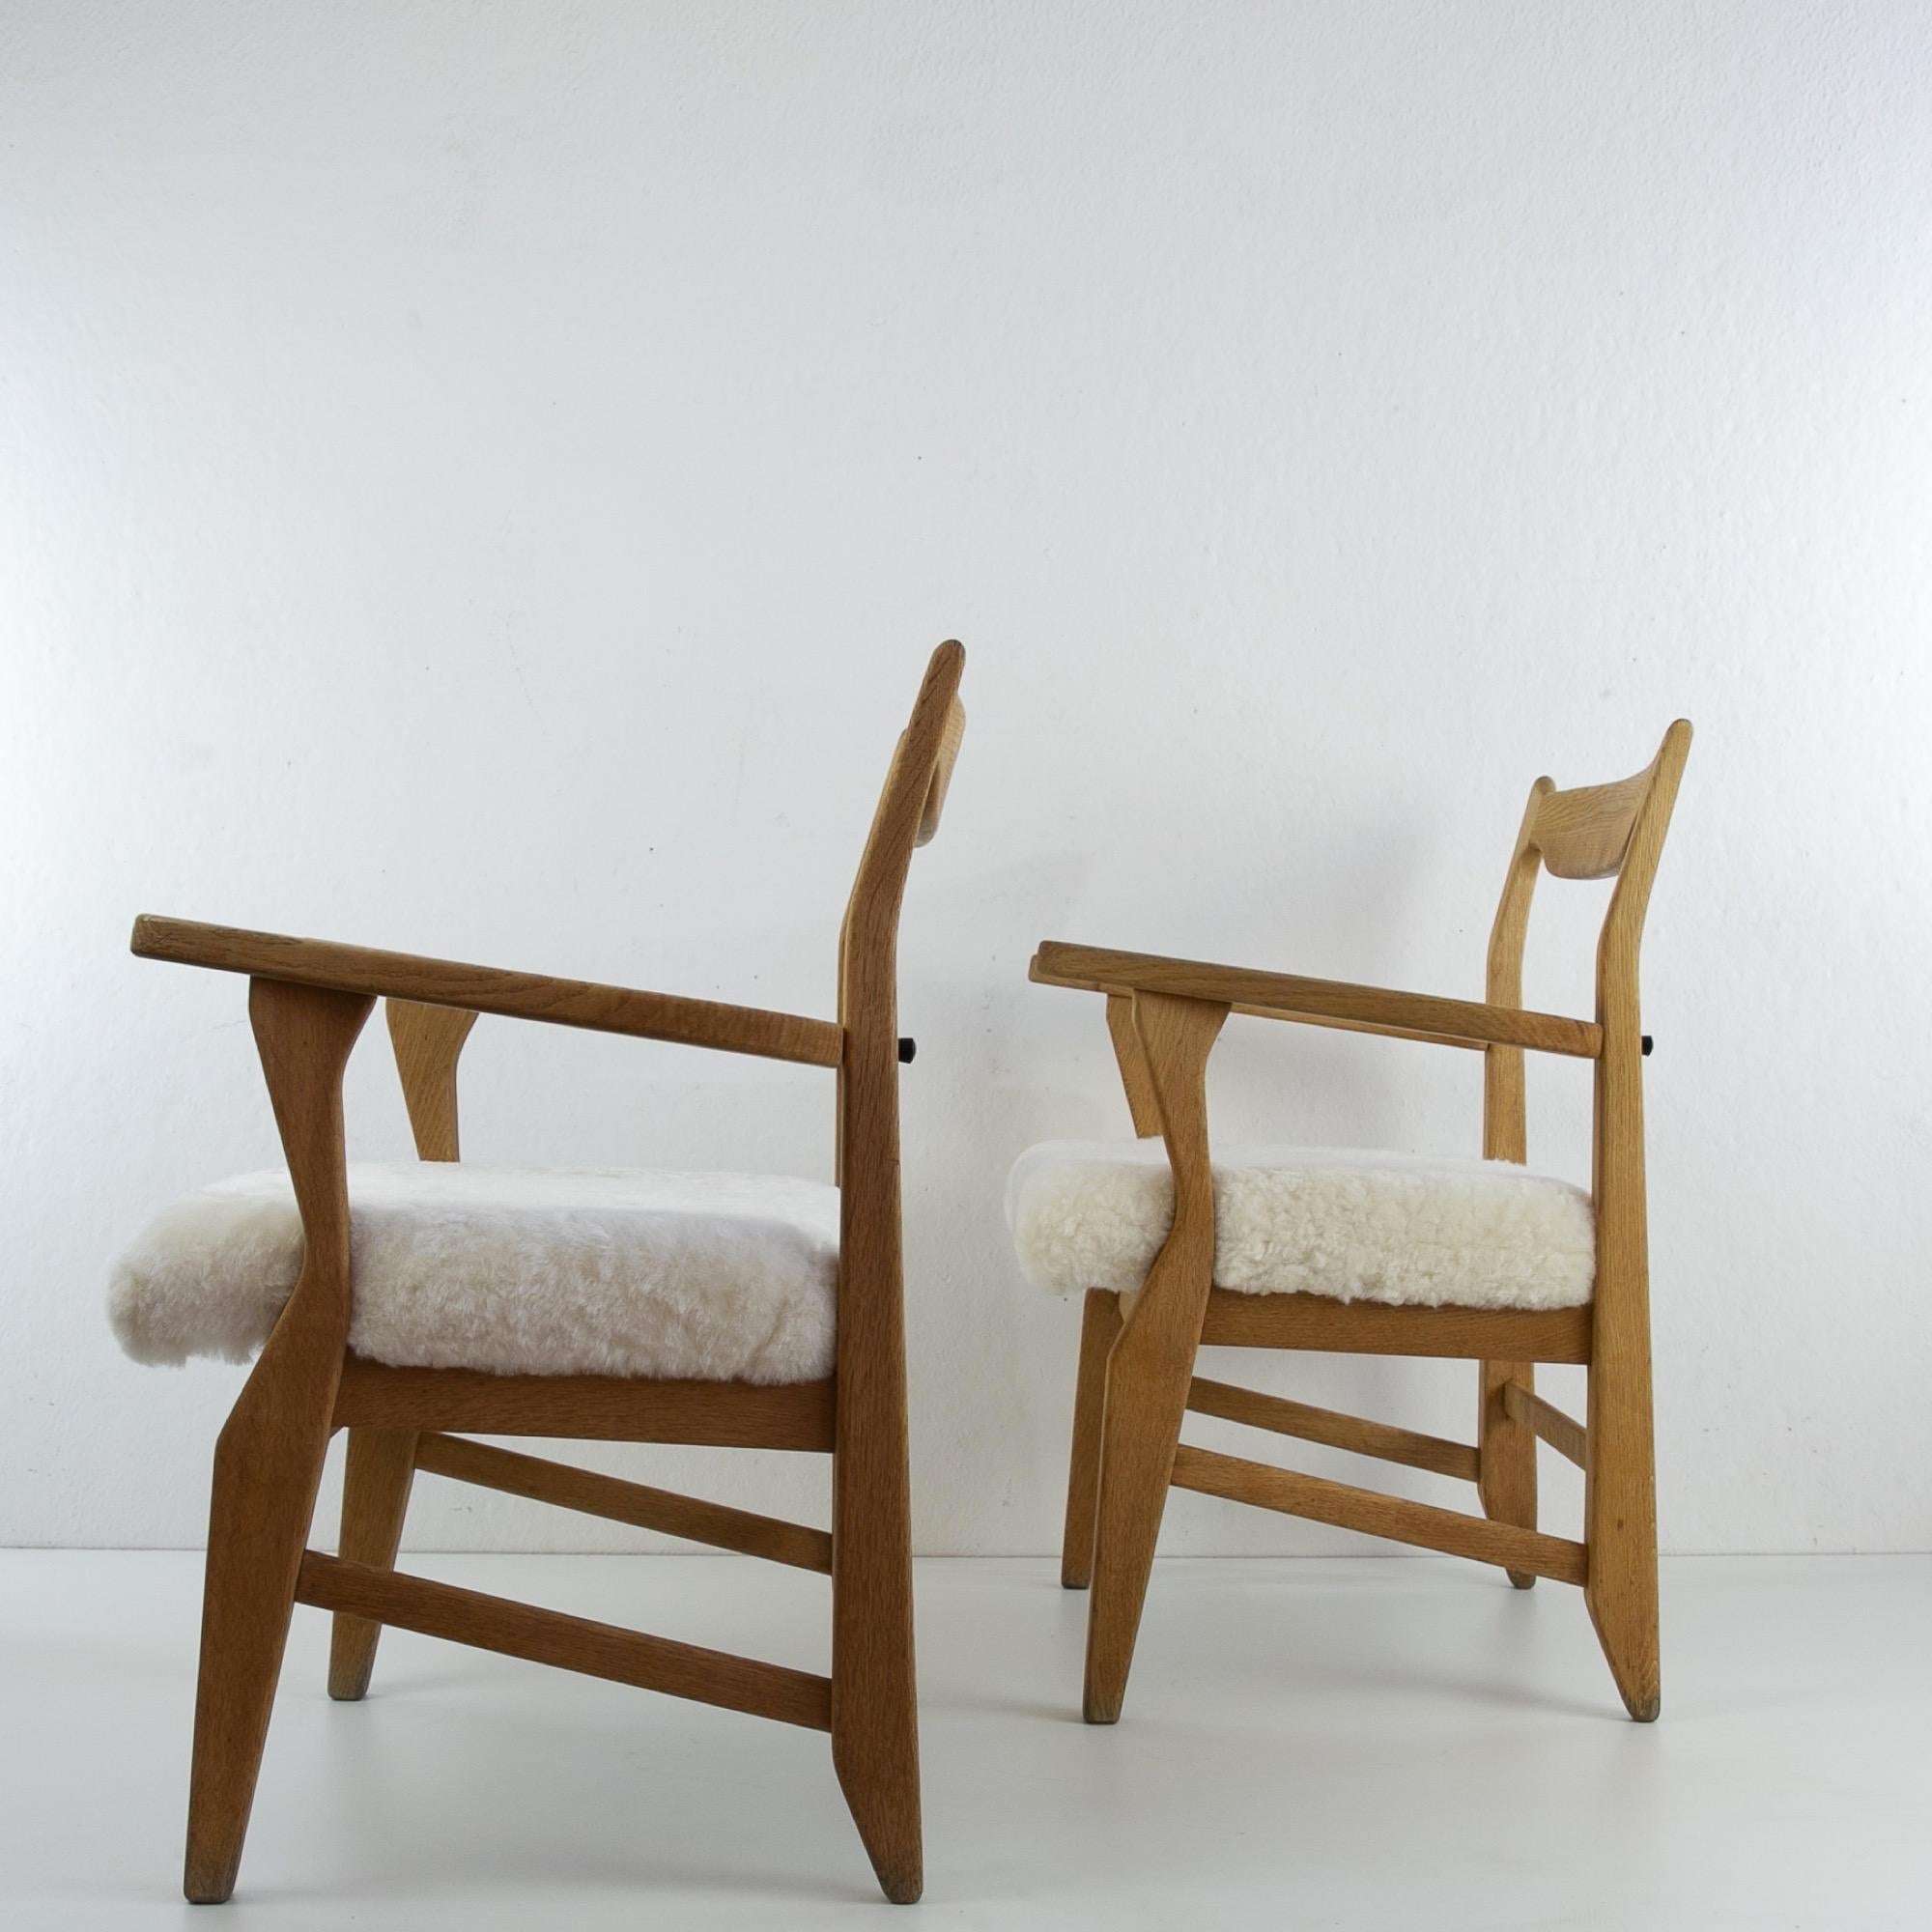 Mid-20th Century French Guillerme et Chambron Armchairs, Hungarian Oak, Lambskin